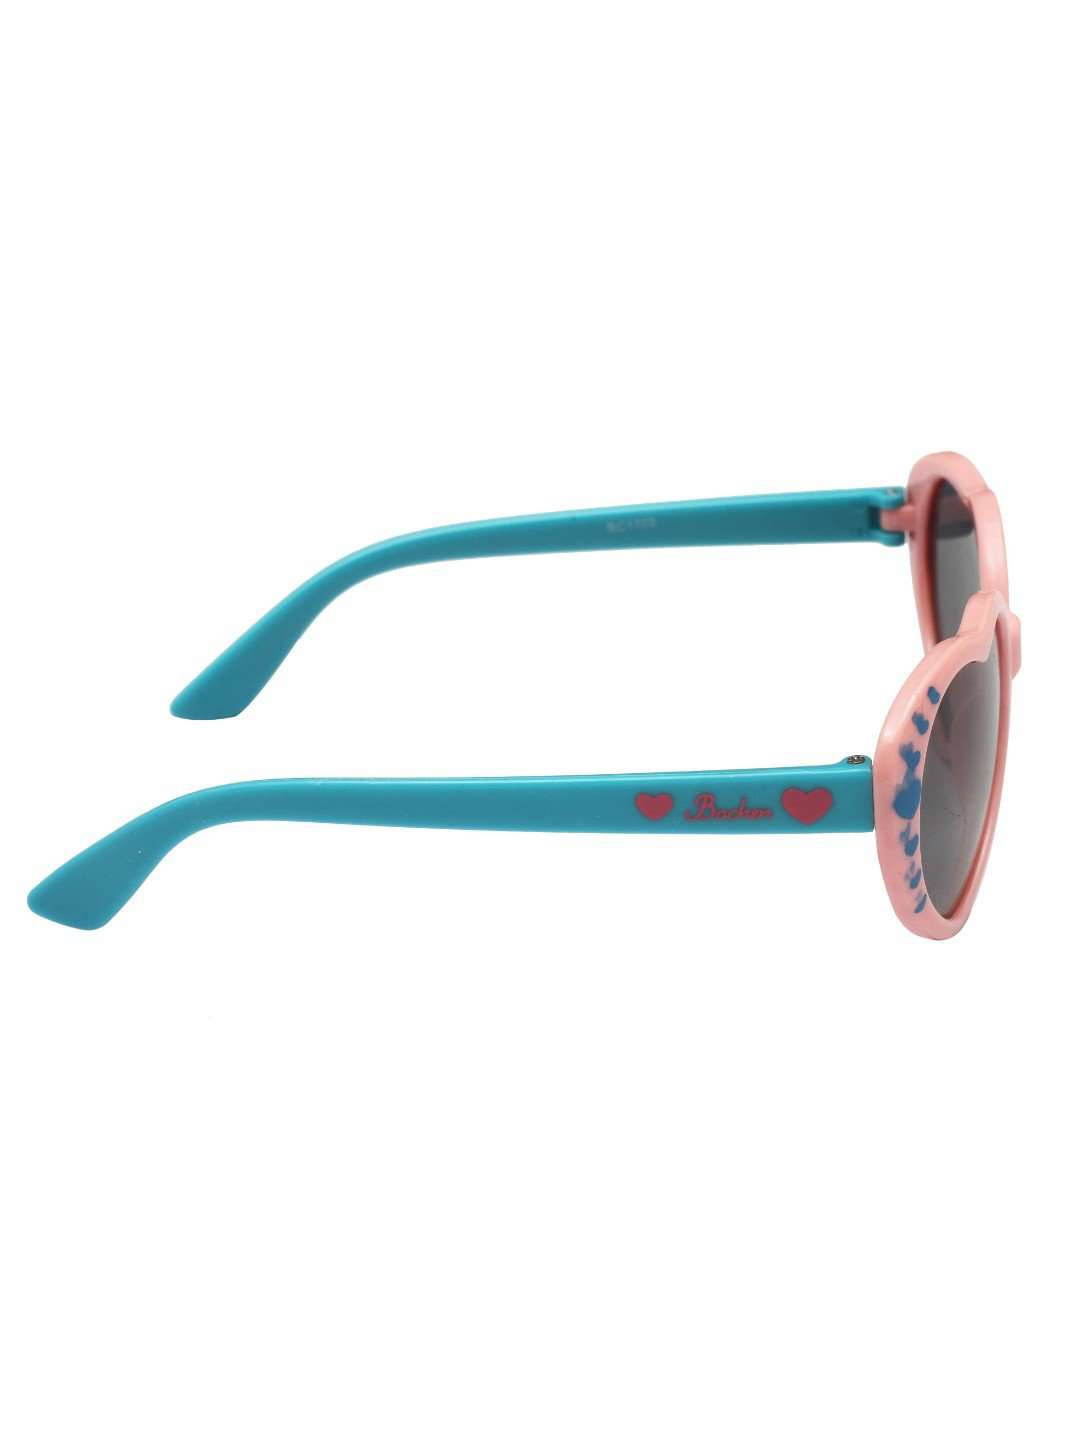 Stol'n Kids Pink and Blue Heart Sunglasses - SWHF